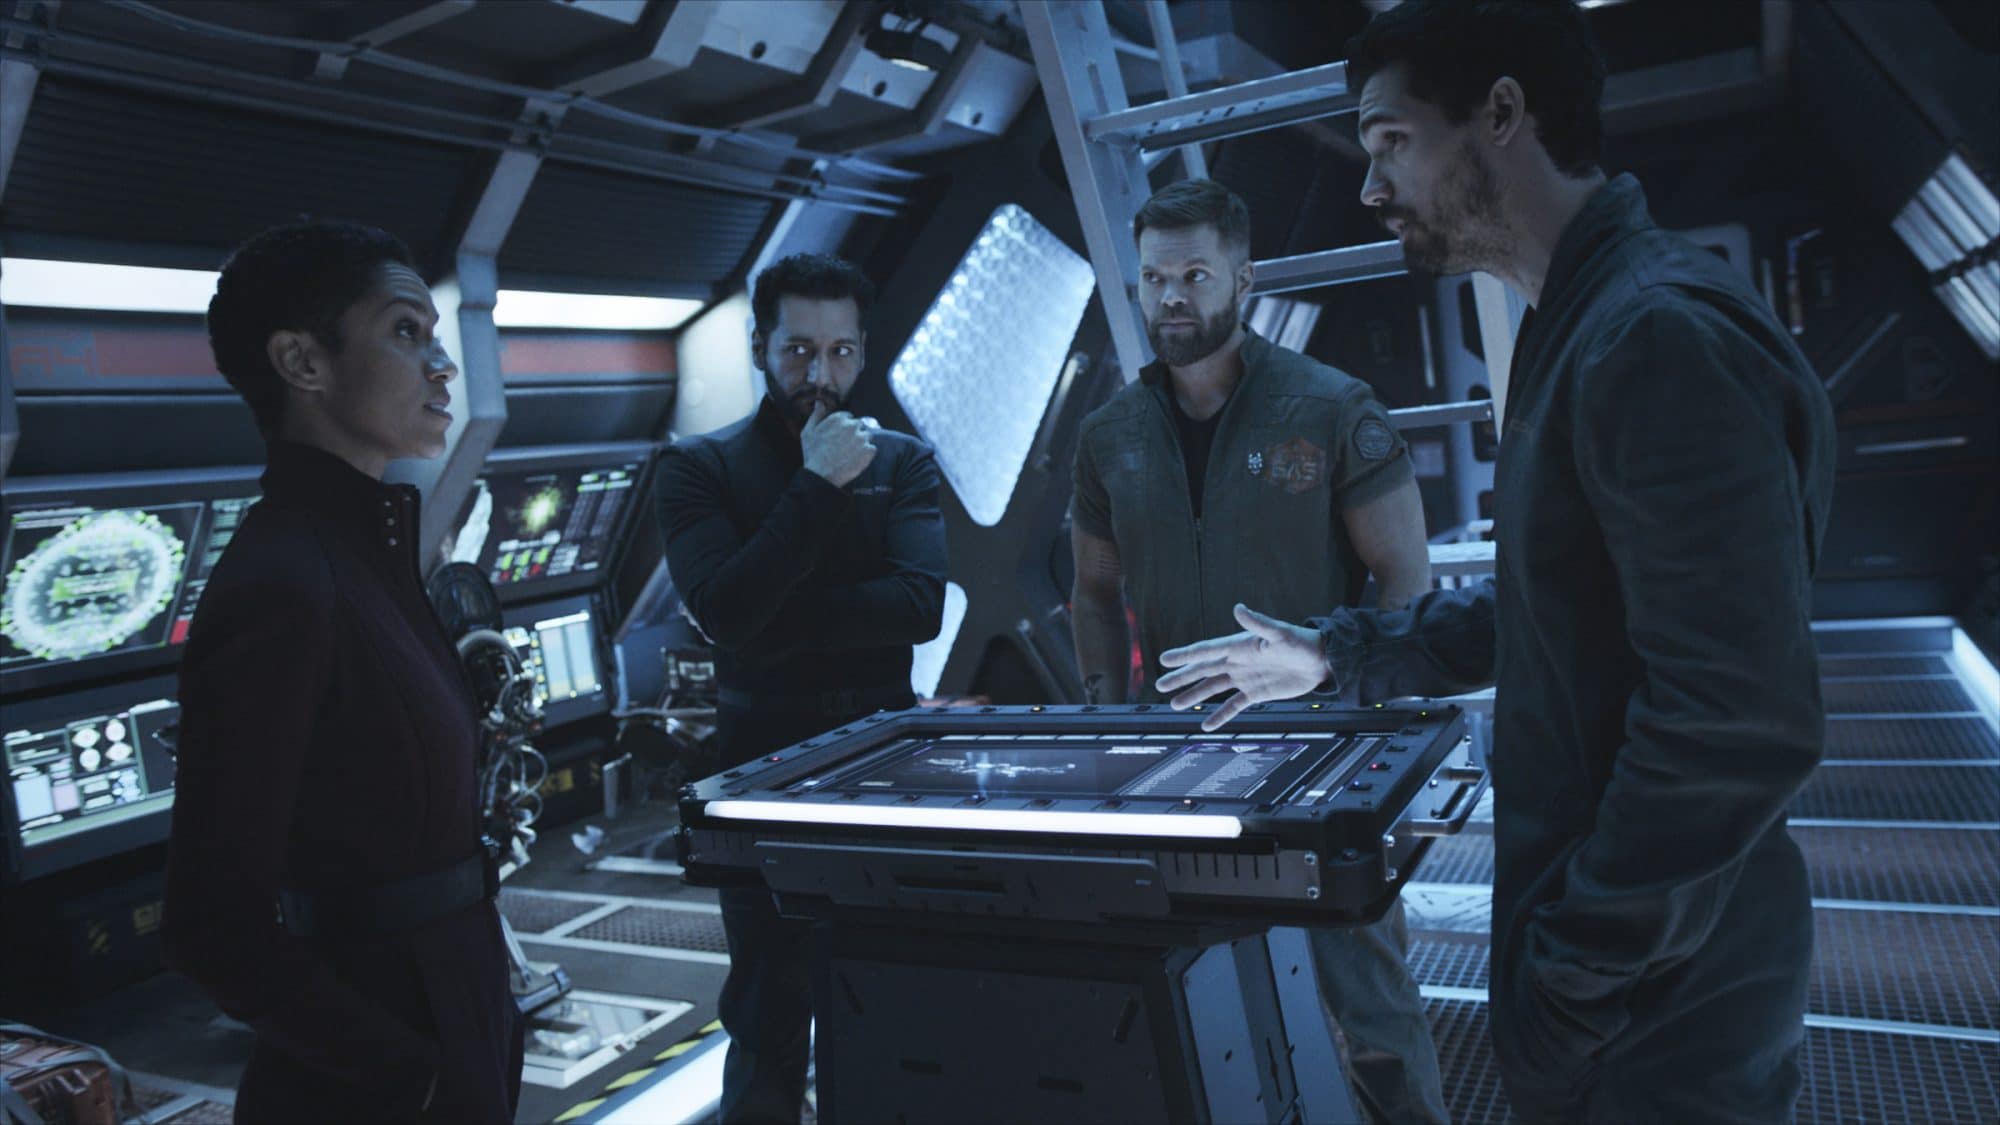 The Expanse final season contracts season 6 truncates too fast and short due to episode season length at Amazon